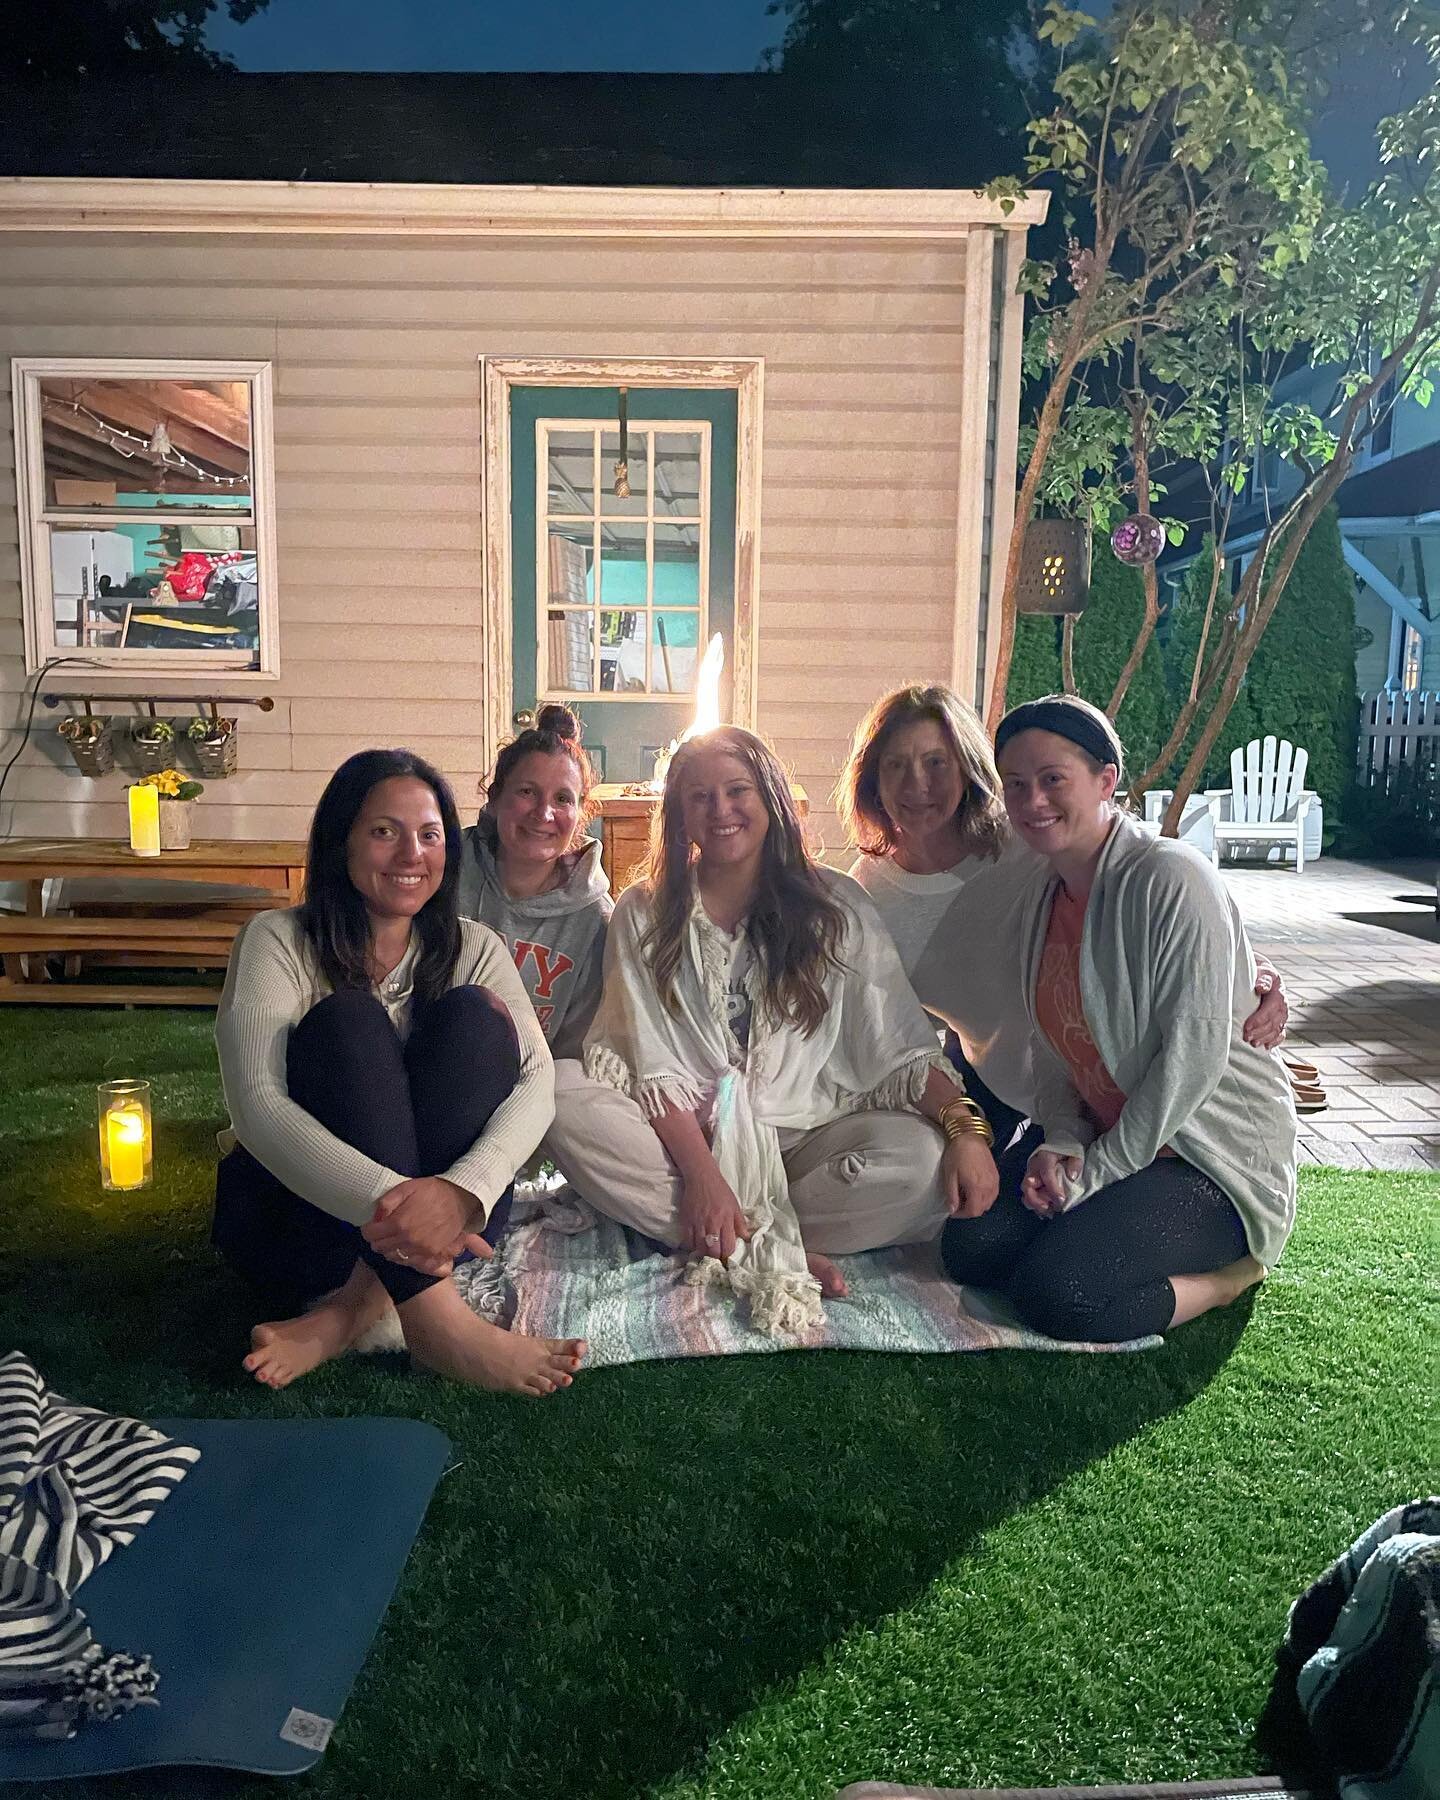 Tonight&rsquo;s Backyard Breathwork @kpaps24 home was wildly beautiful.🌷🧘🏻&zwj;♀️🌷

We almost camped out there for the night.🌌🏕

Book your private session for may only a few magical dates left! 🗓💫
&bull;
&bull;
&bull;
#breathwork #breathworkh